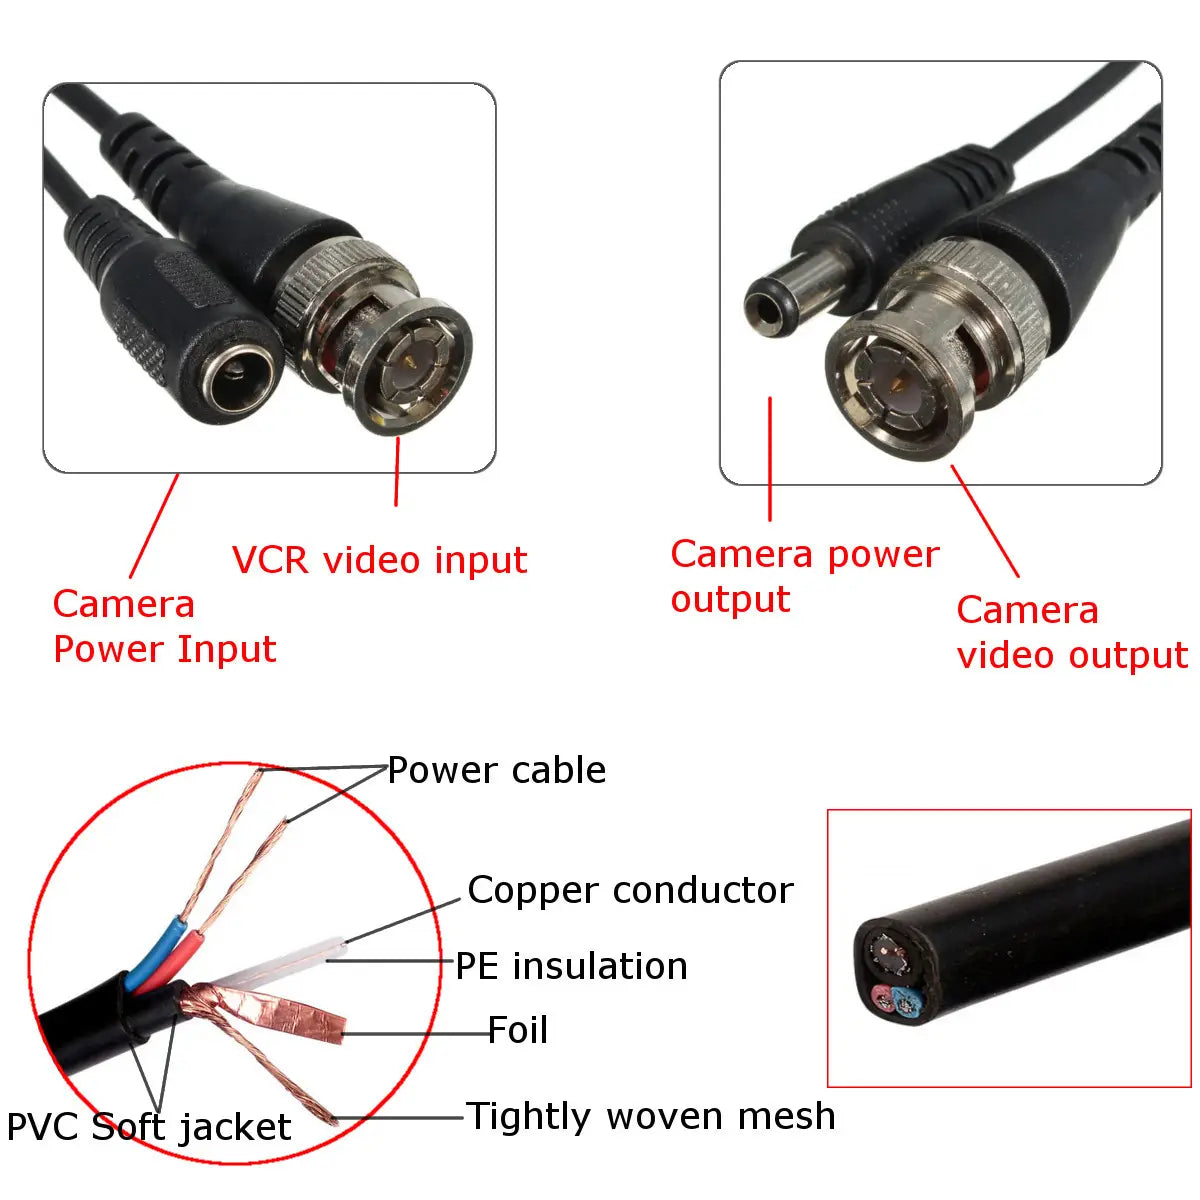 65ft 20m Security Camera Cable Video Power Extension Wire